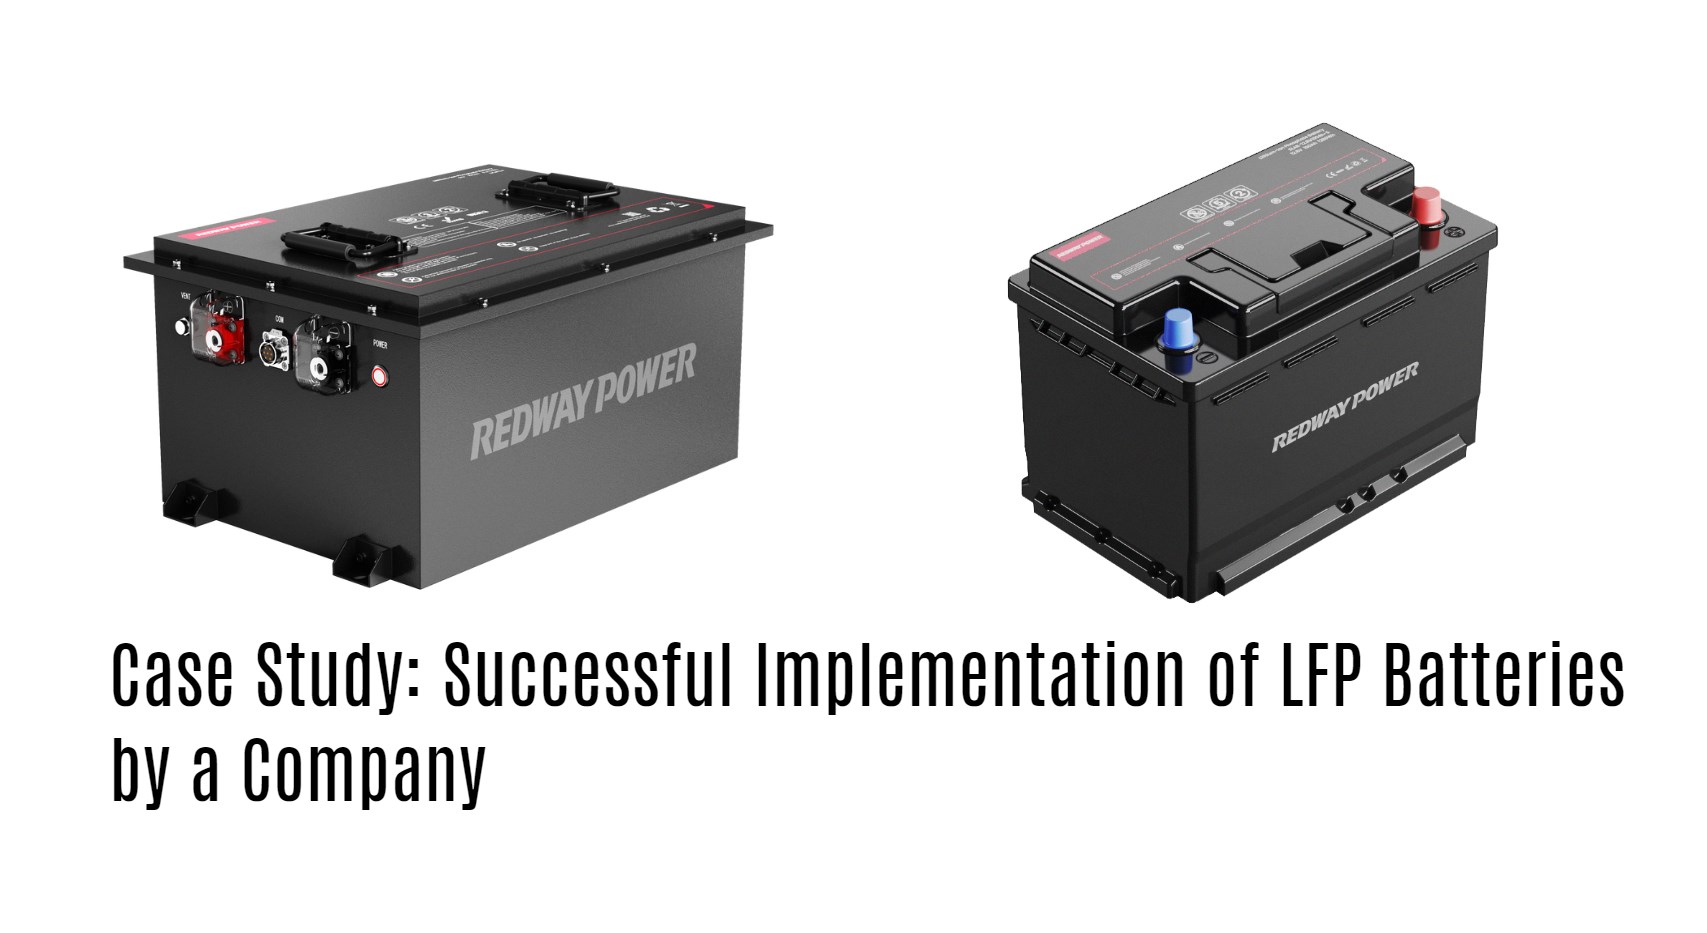 Case Study: Successful Implementation of LFP Batteries by a Company